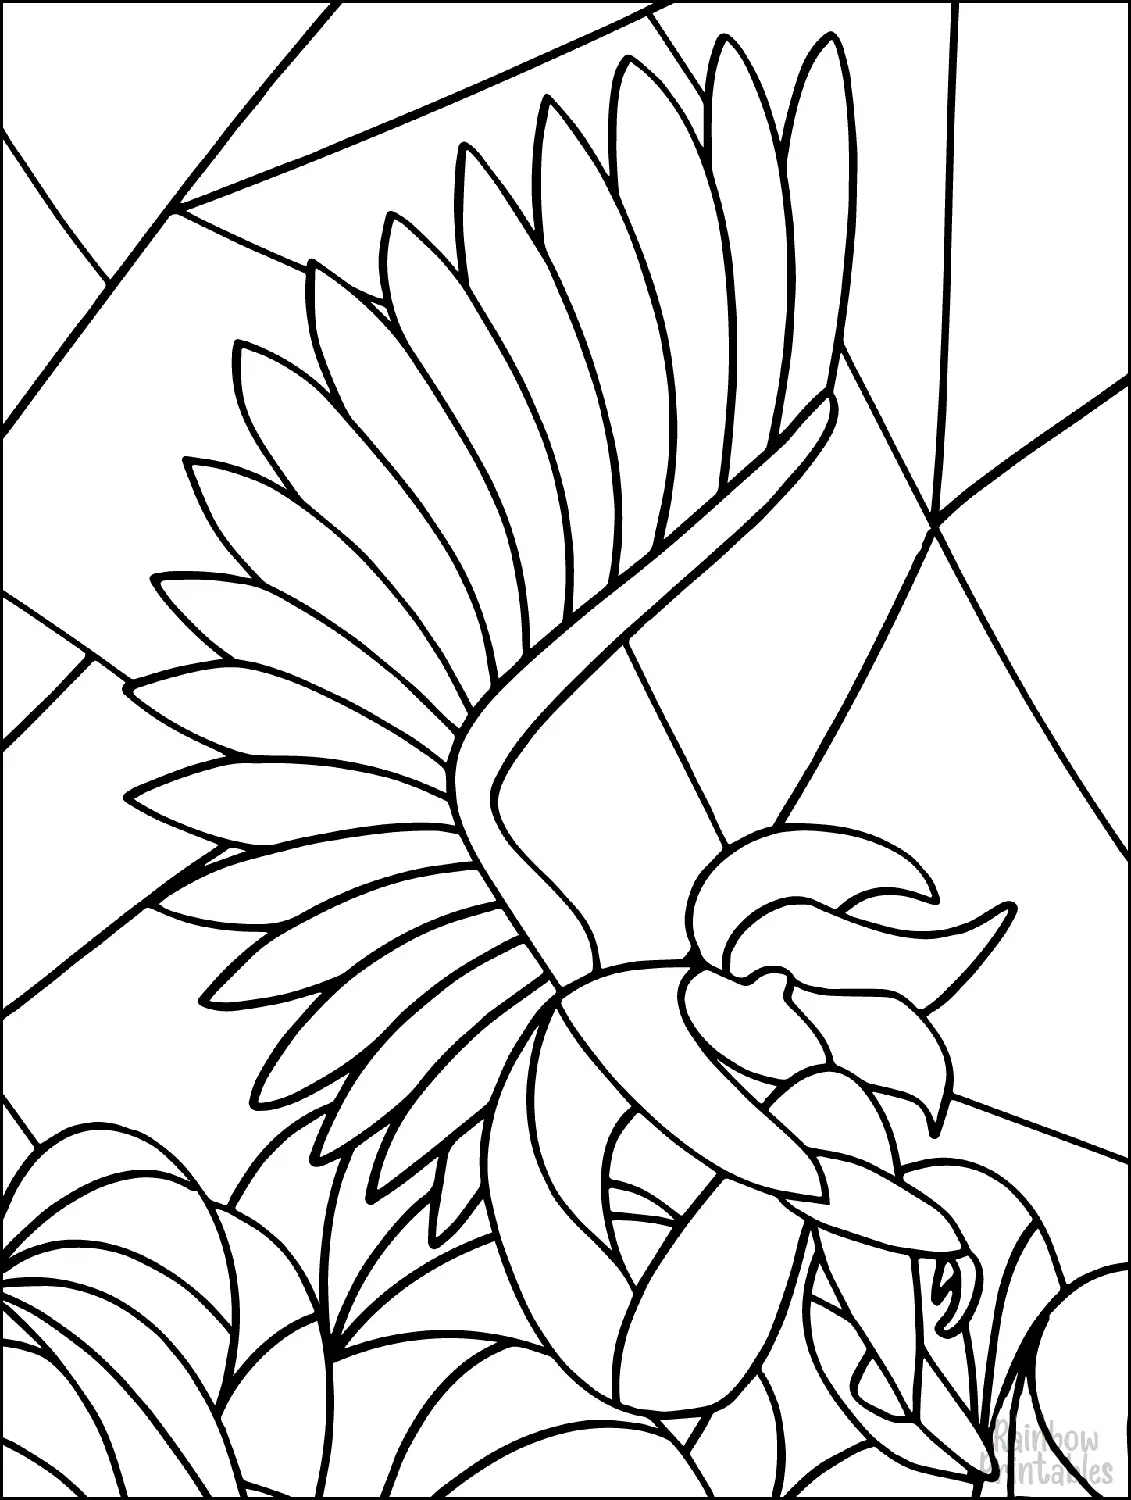 FALLEN ANGEL OF SORROW STAINED GLASS Clipart Coloring Pages for Kids Adults Art Activities Line Art